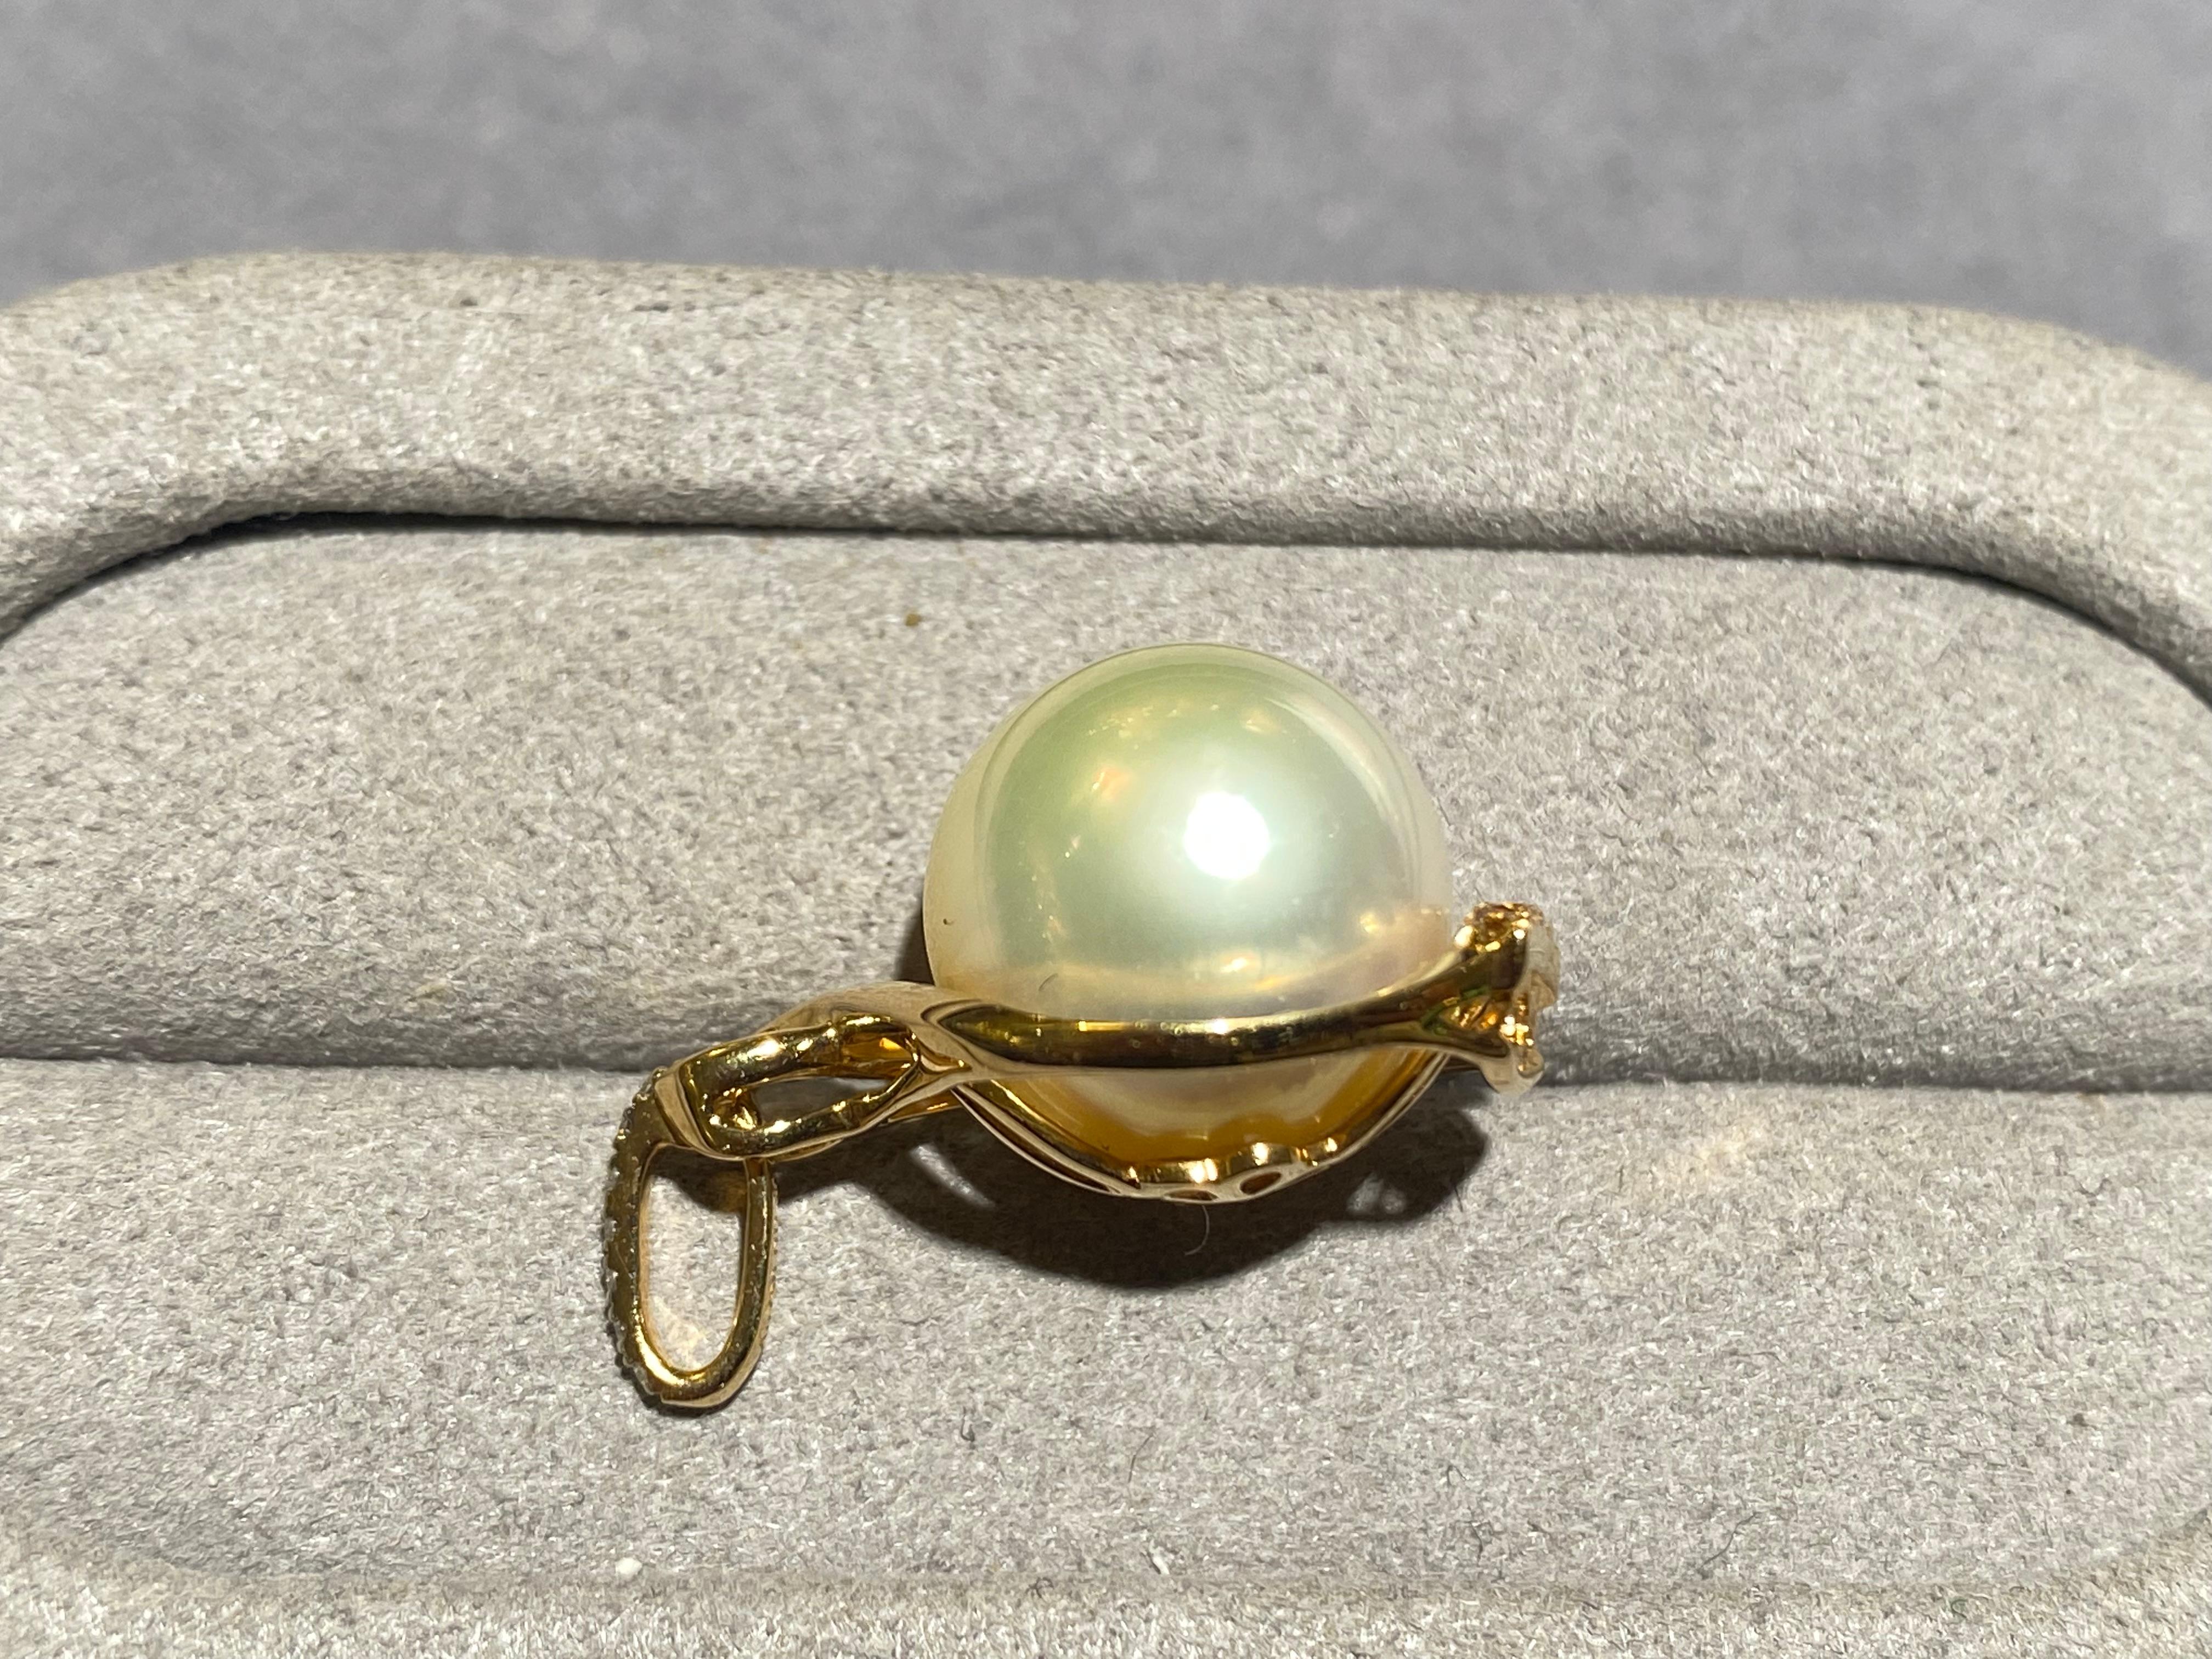 A round 12.5 mm light champagne colour south sea pearl and diamond pendant in 18k yellow gold. The pendant resemble that of a vase with flat bottom and wide stomach. At the bottom of the pendant are yellow diamond pave and white diamonds are set on